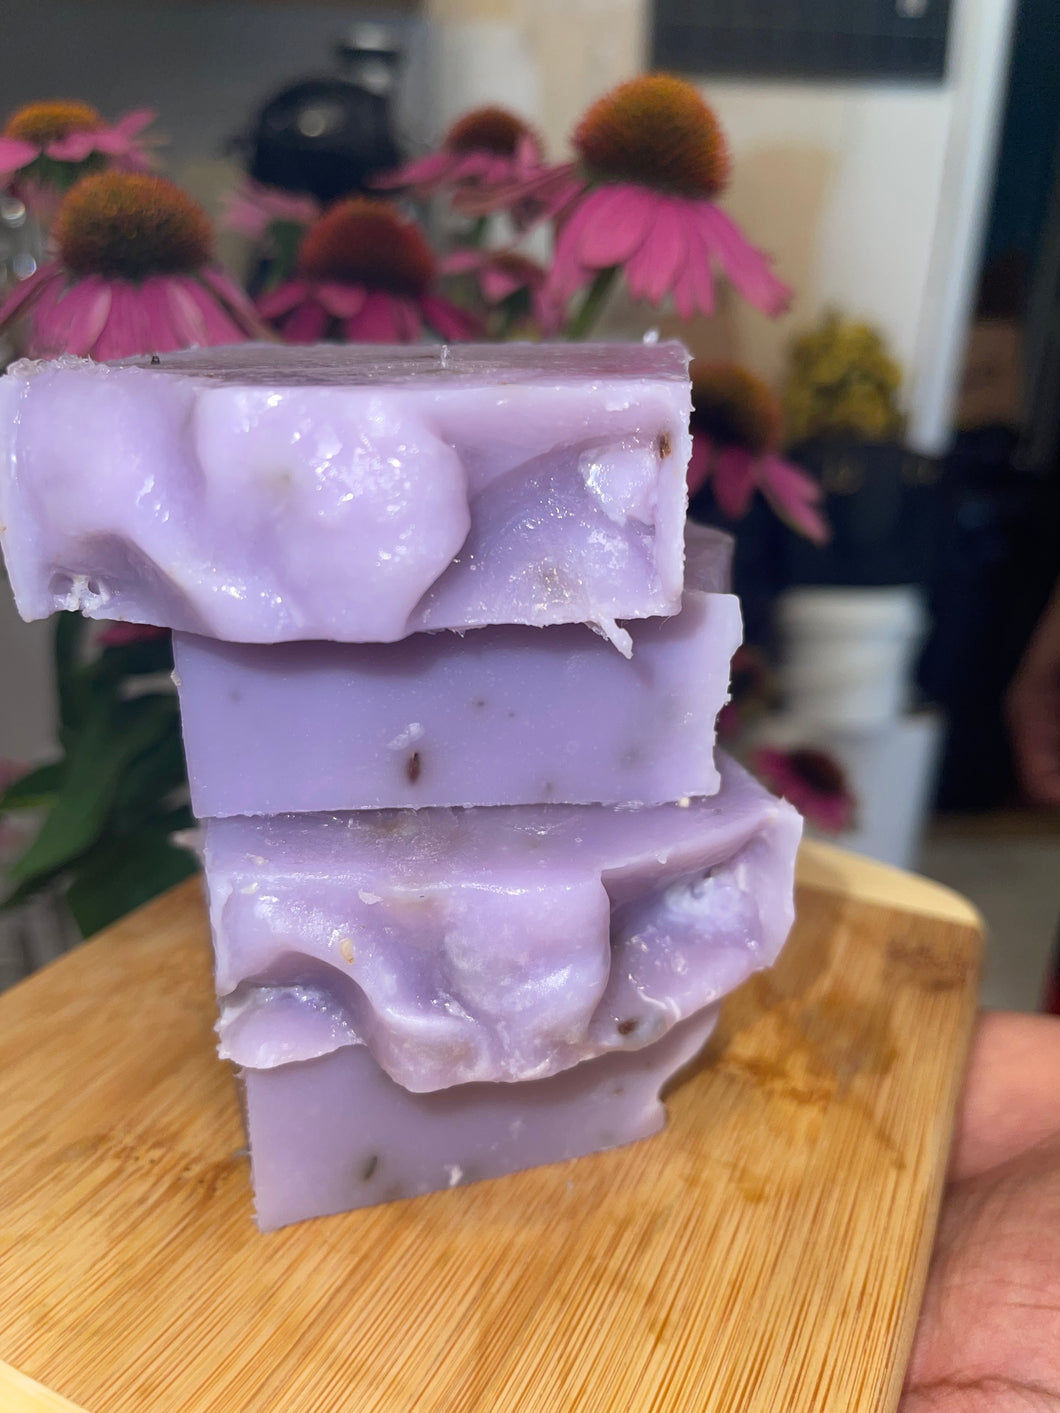 Noureture By Nature’s Lavender Infusion Handmade Soap. Handmade Vegan Soap. Organic Ingredients Soap. All-Natural Handmade Soap. Cruelty Free Ingredients Soap. Small Business Soap. Black Women in Business Soap. Handmade Soap on circular wooden board, placed on top of kitchen counter. Nigerian Shea Butter Handmade Soap.